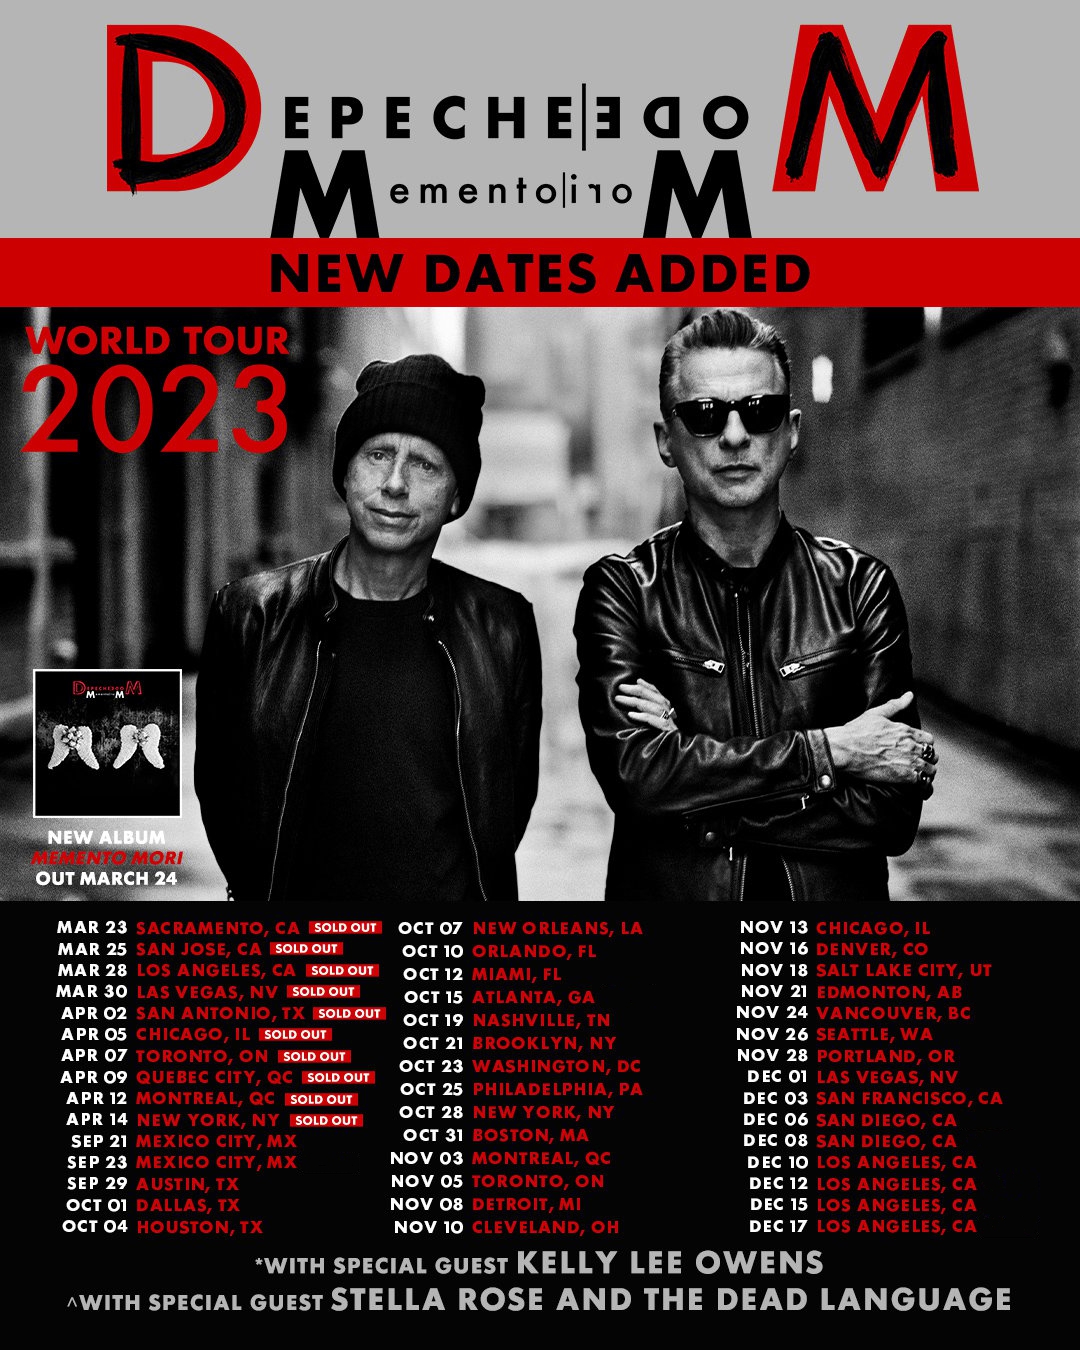 Depeche Mode will bring the Memento Mori Tour back to Europe in 2024! In  February they will perform in Prague's O2 arena – O2 arena